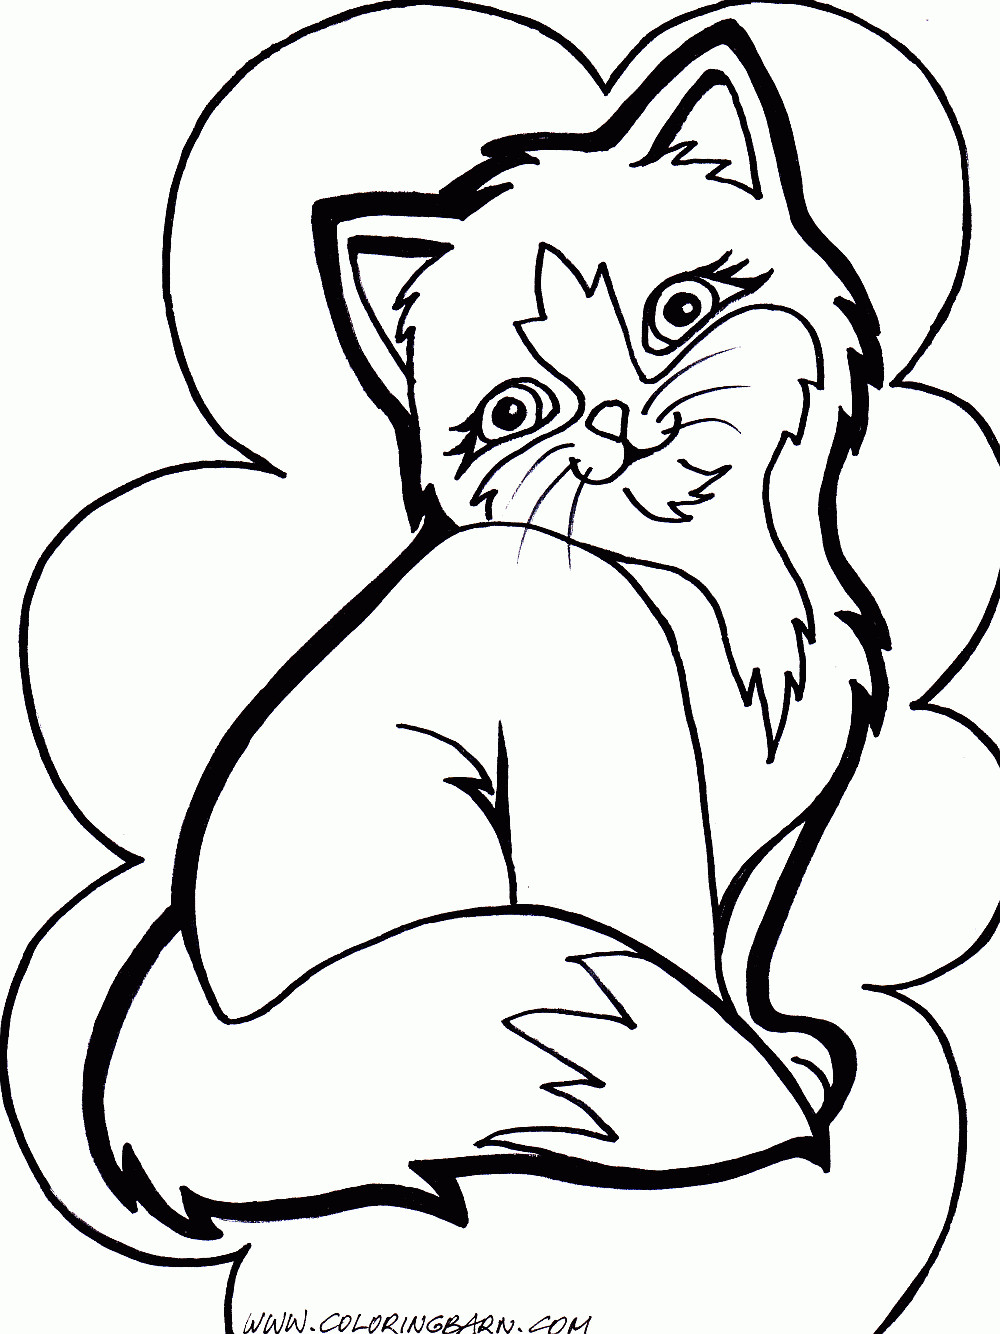 Real Kitten Coloring Sheets For Girls
 Female Kitten Coloring Pages For Girls